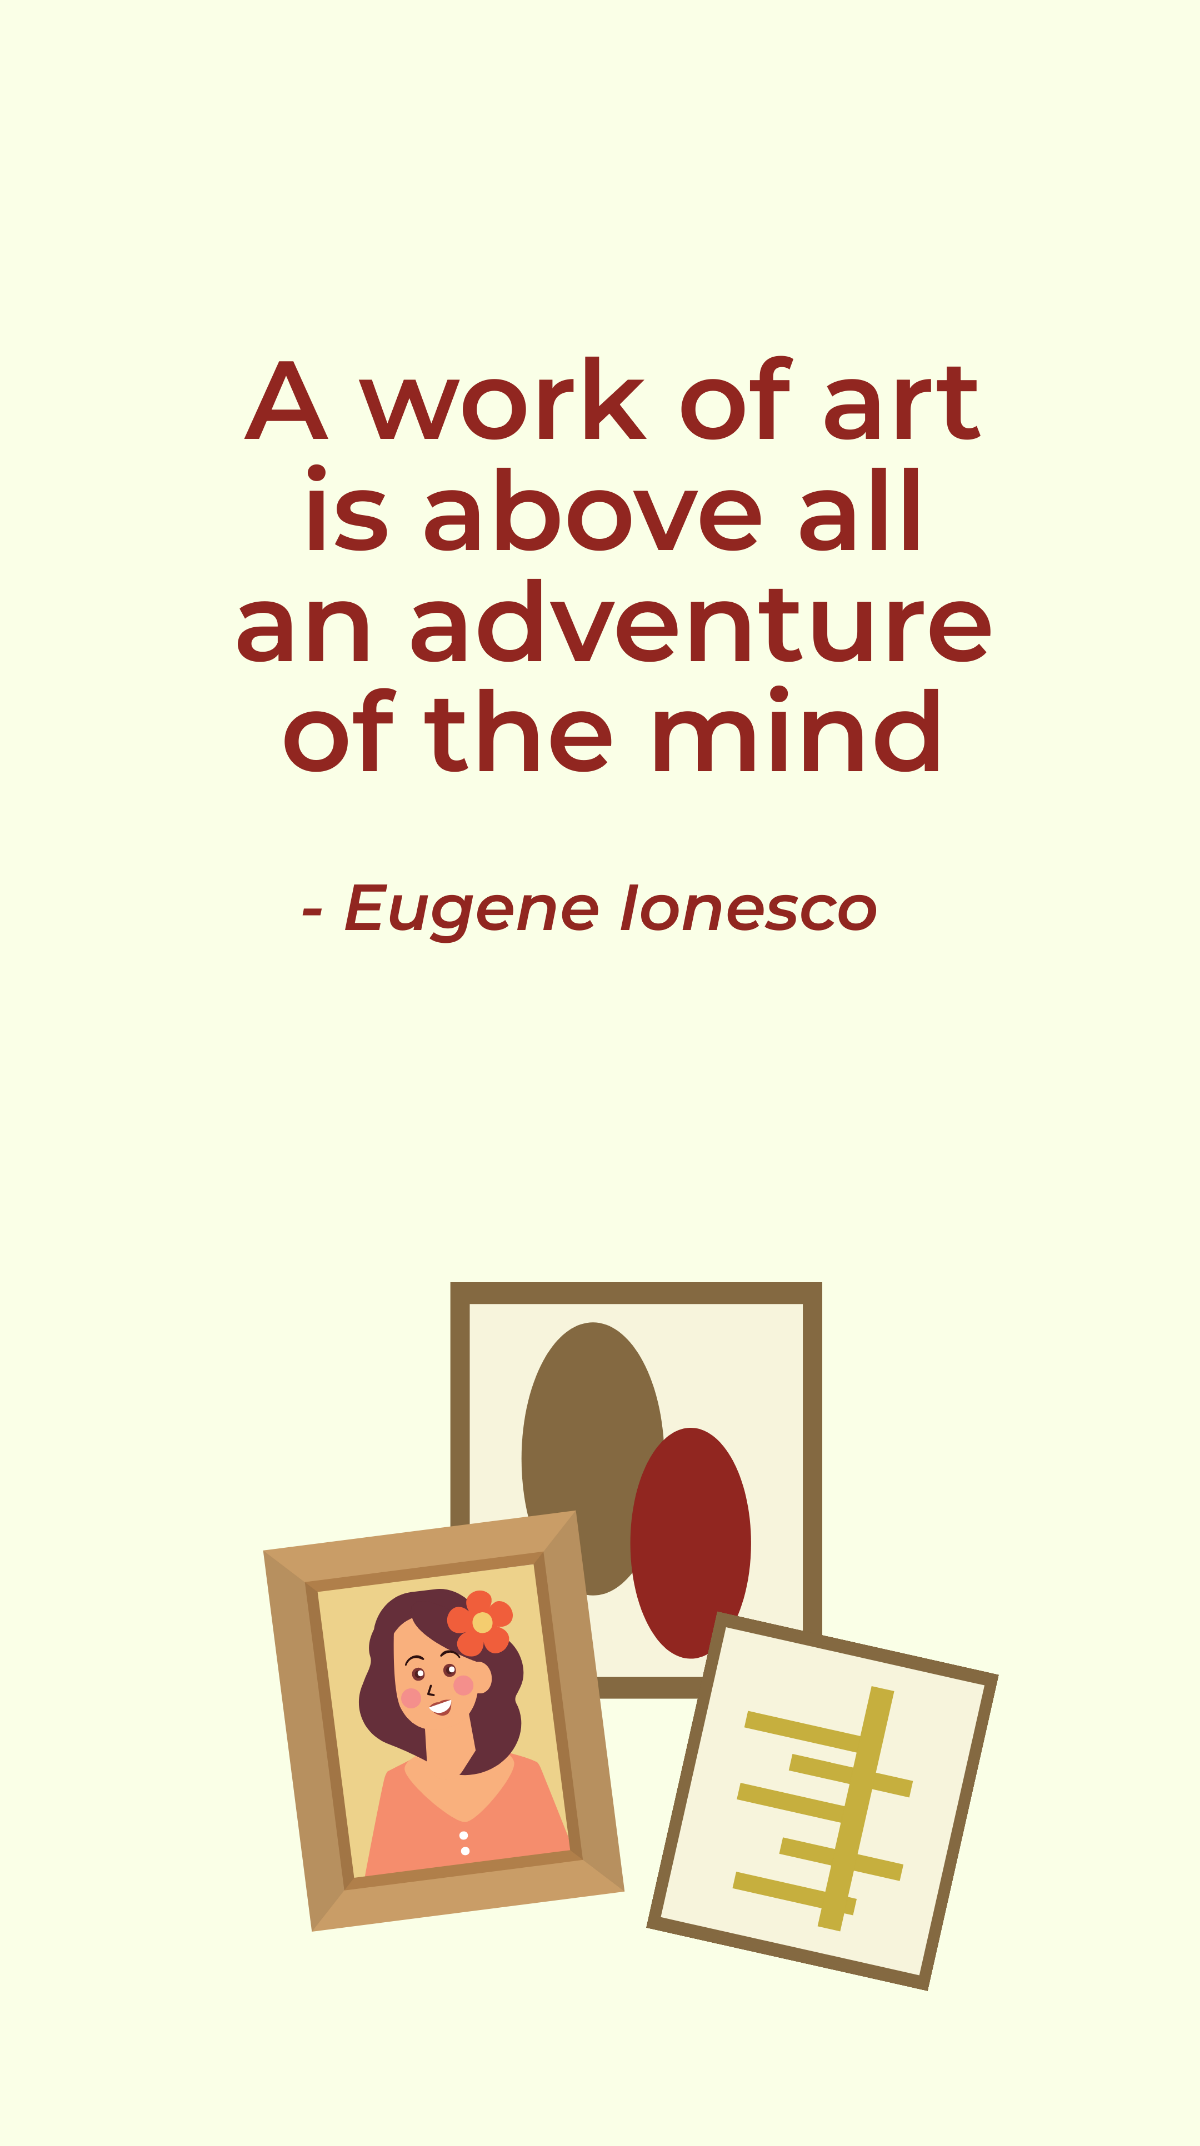 Eugene Ionesco - A work of art is above all an adventure of the mind Template